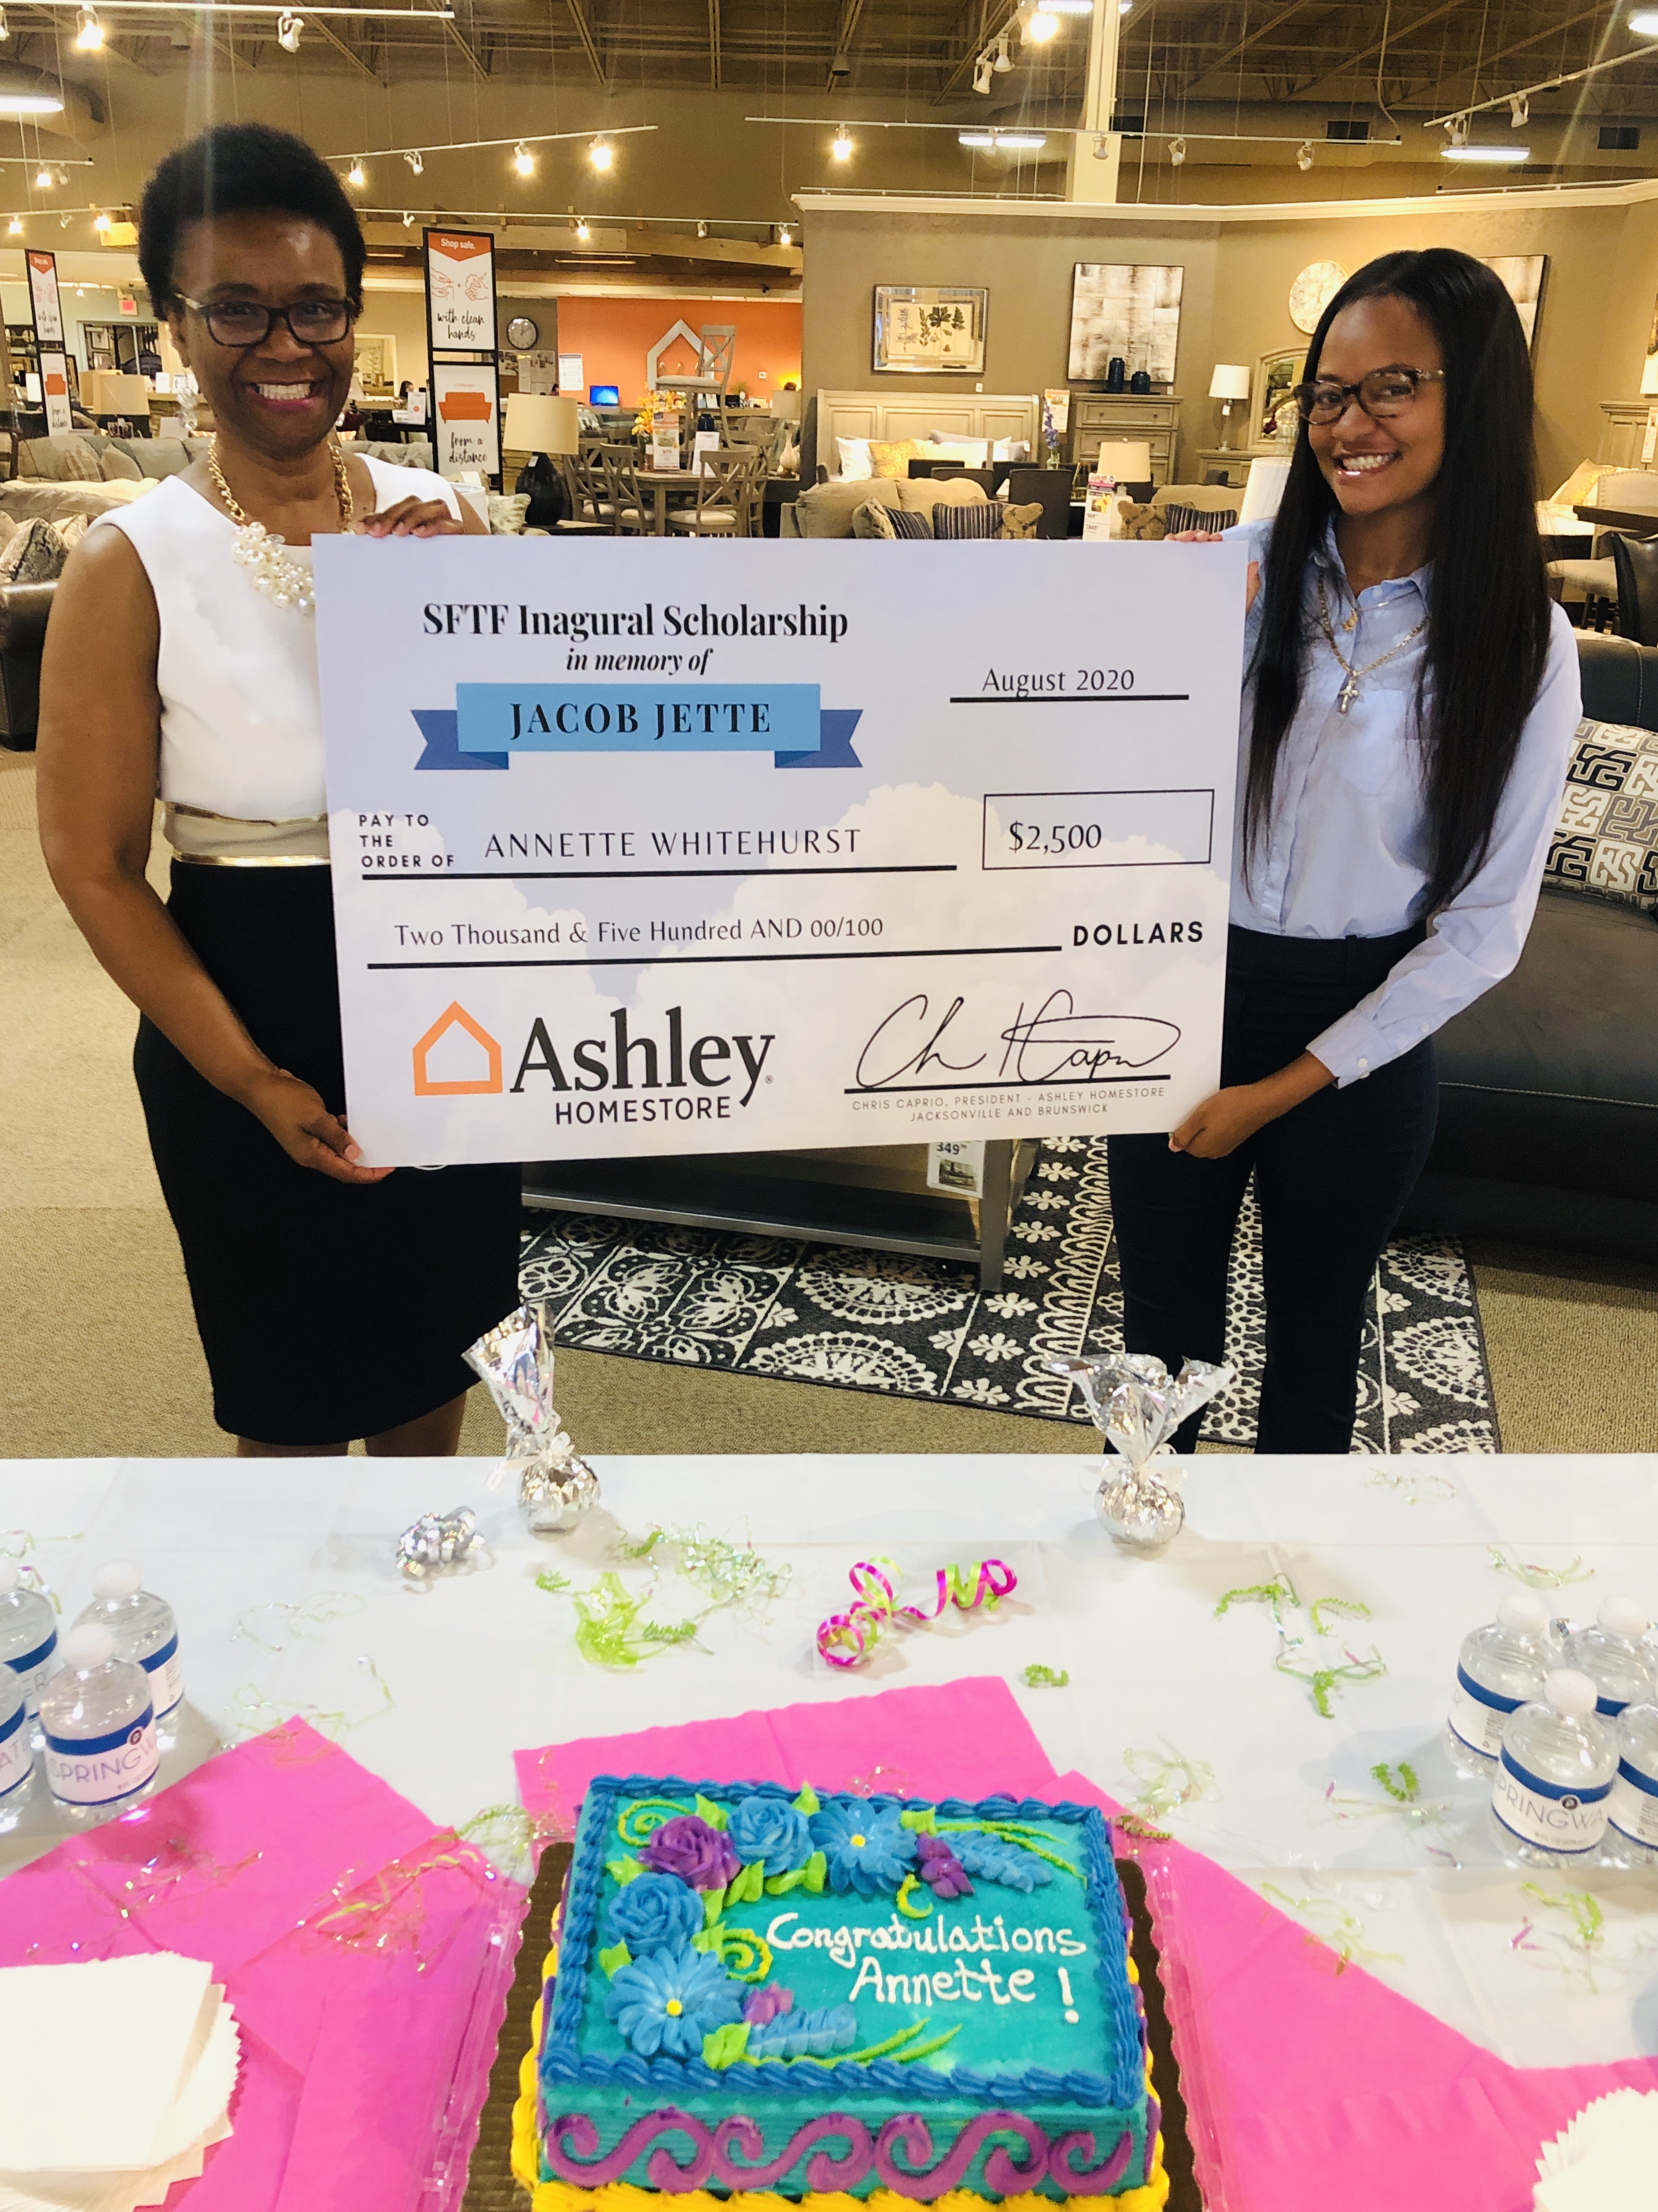 Ashley HomeStore Retail Sales Associate, Anita Whitehurst, and her daughter, Annette, accepted the scholarship award during a celebration at the St. Johns Town Center Ashley HomeStore location.